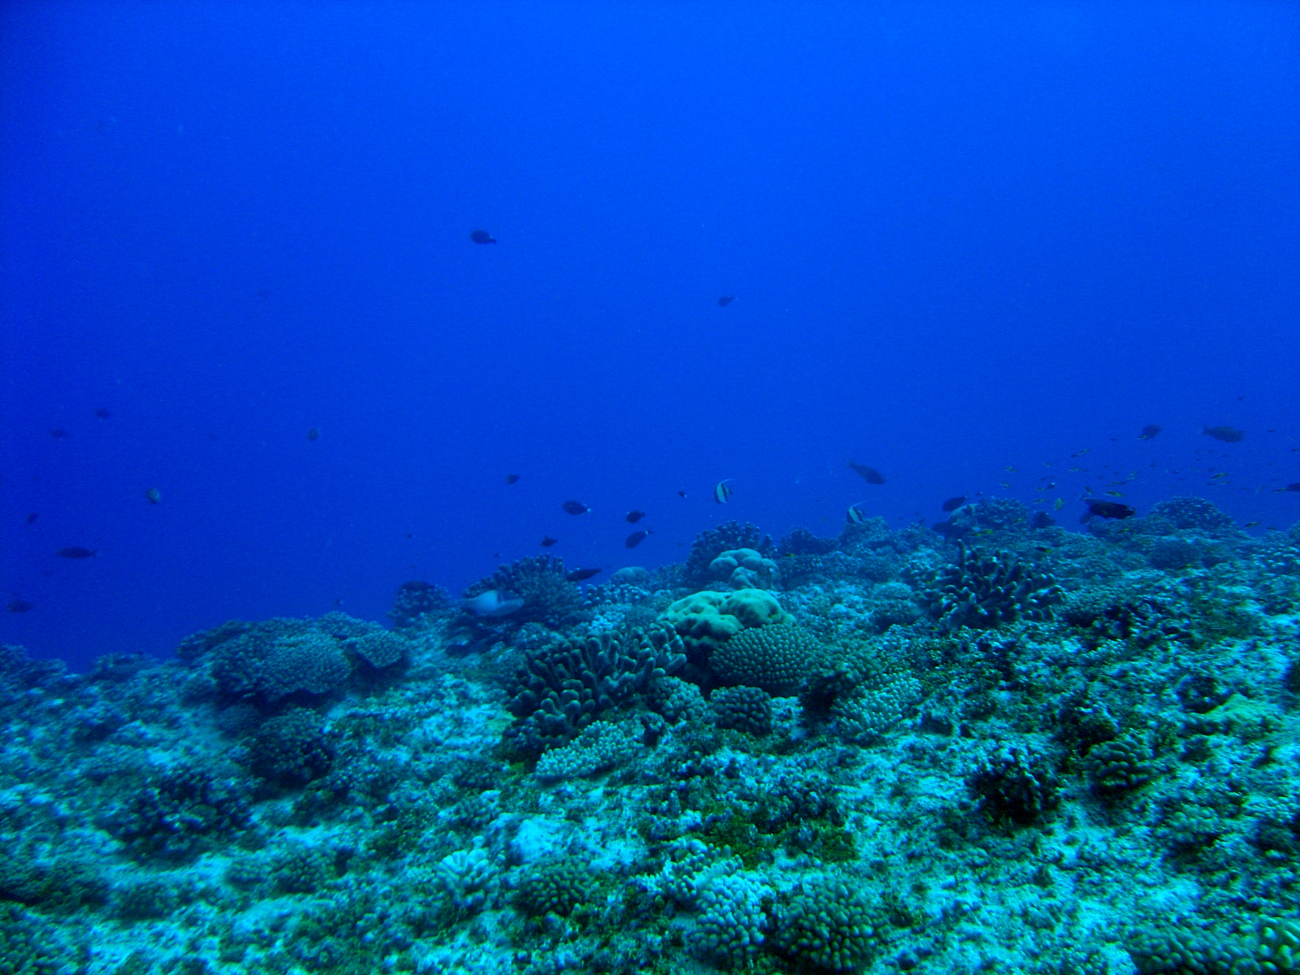 Reef scene with a variety of reef fish